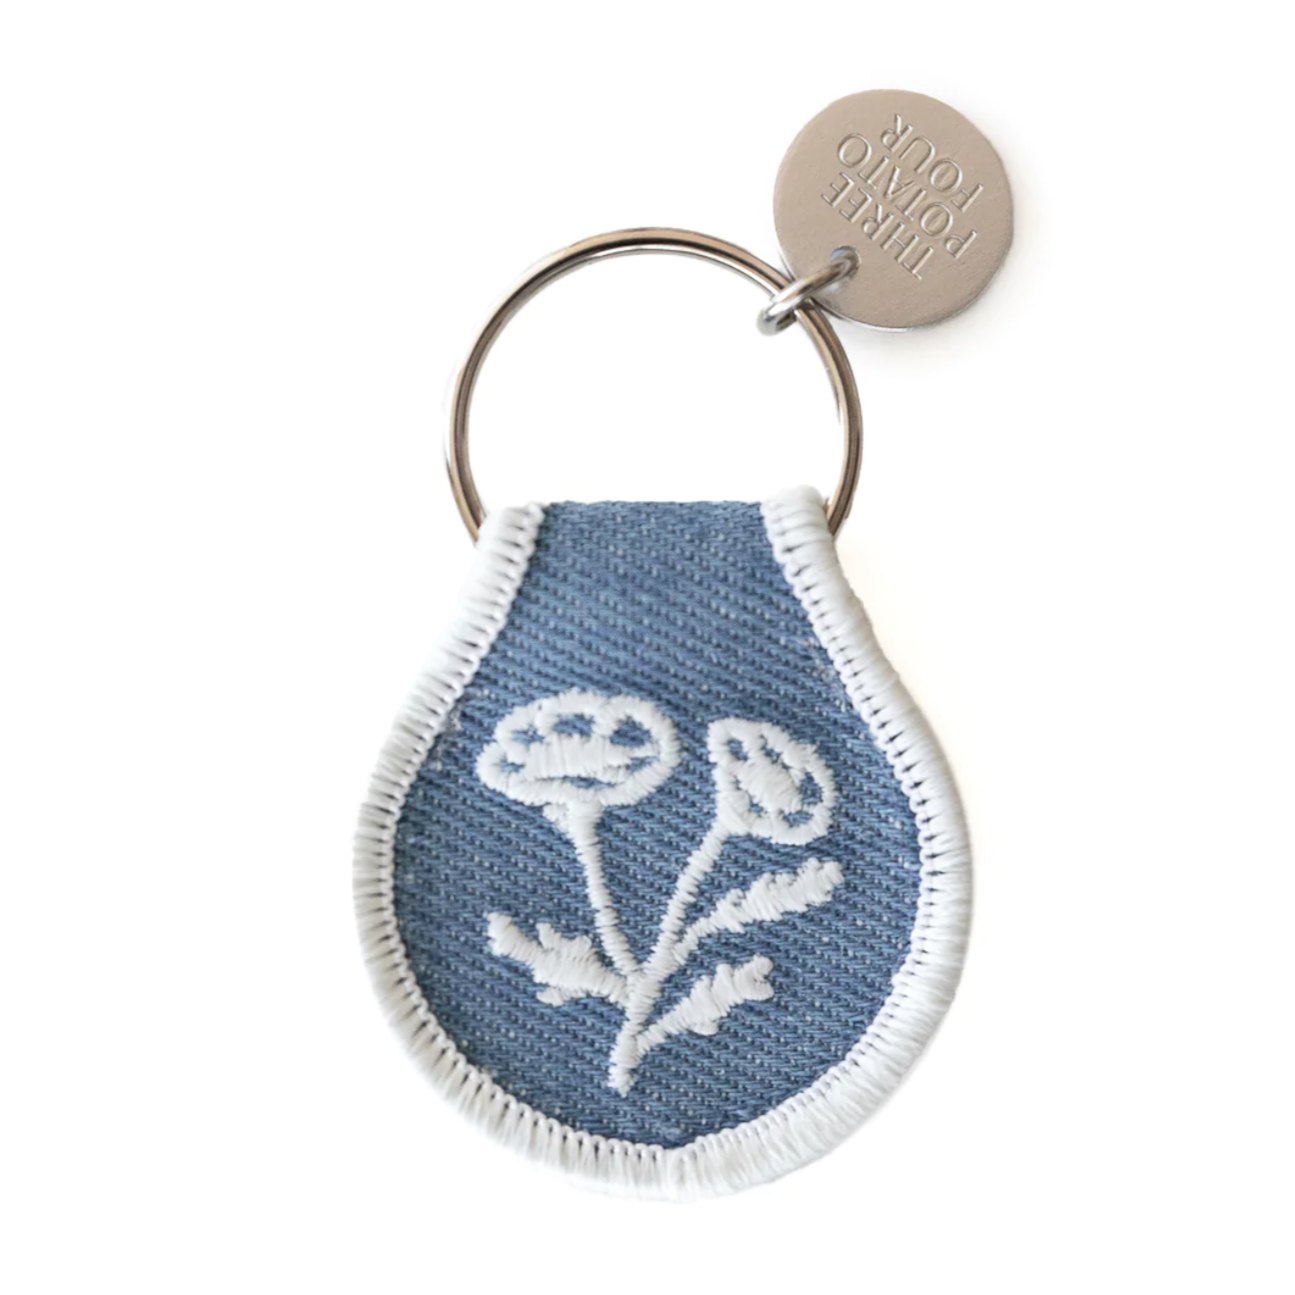 Patch Keychain - Buttercup